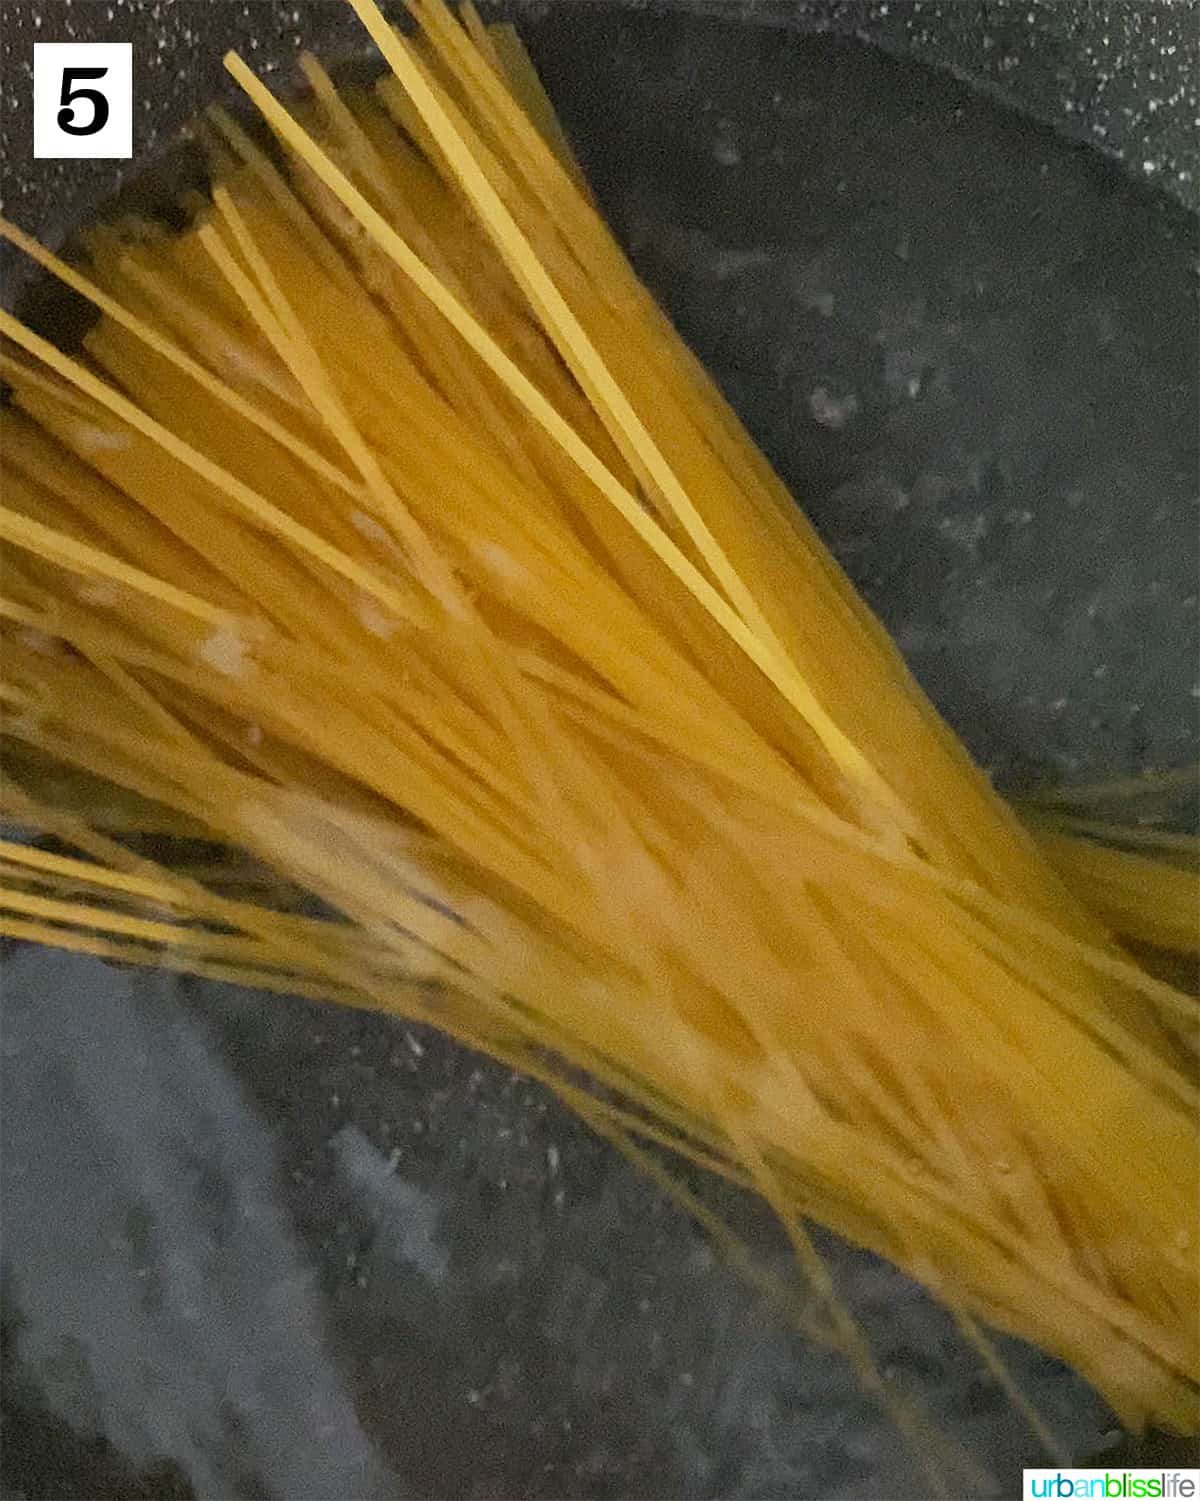 spaghetti noodles in a pot of water to cook.